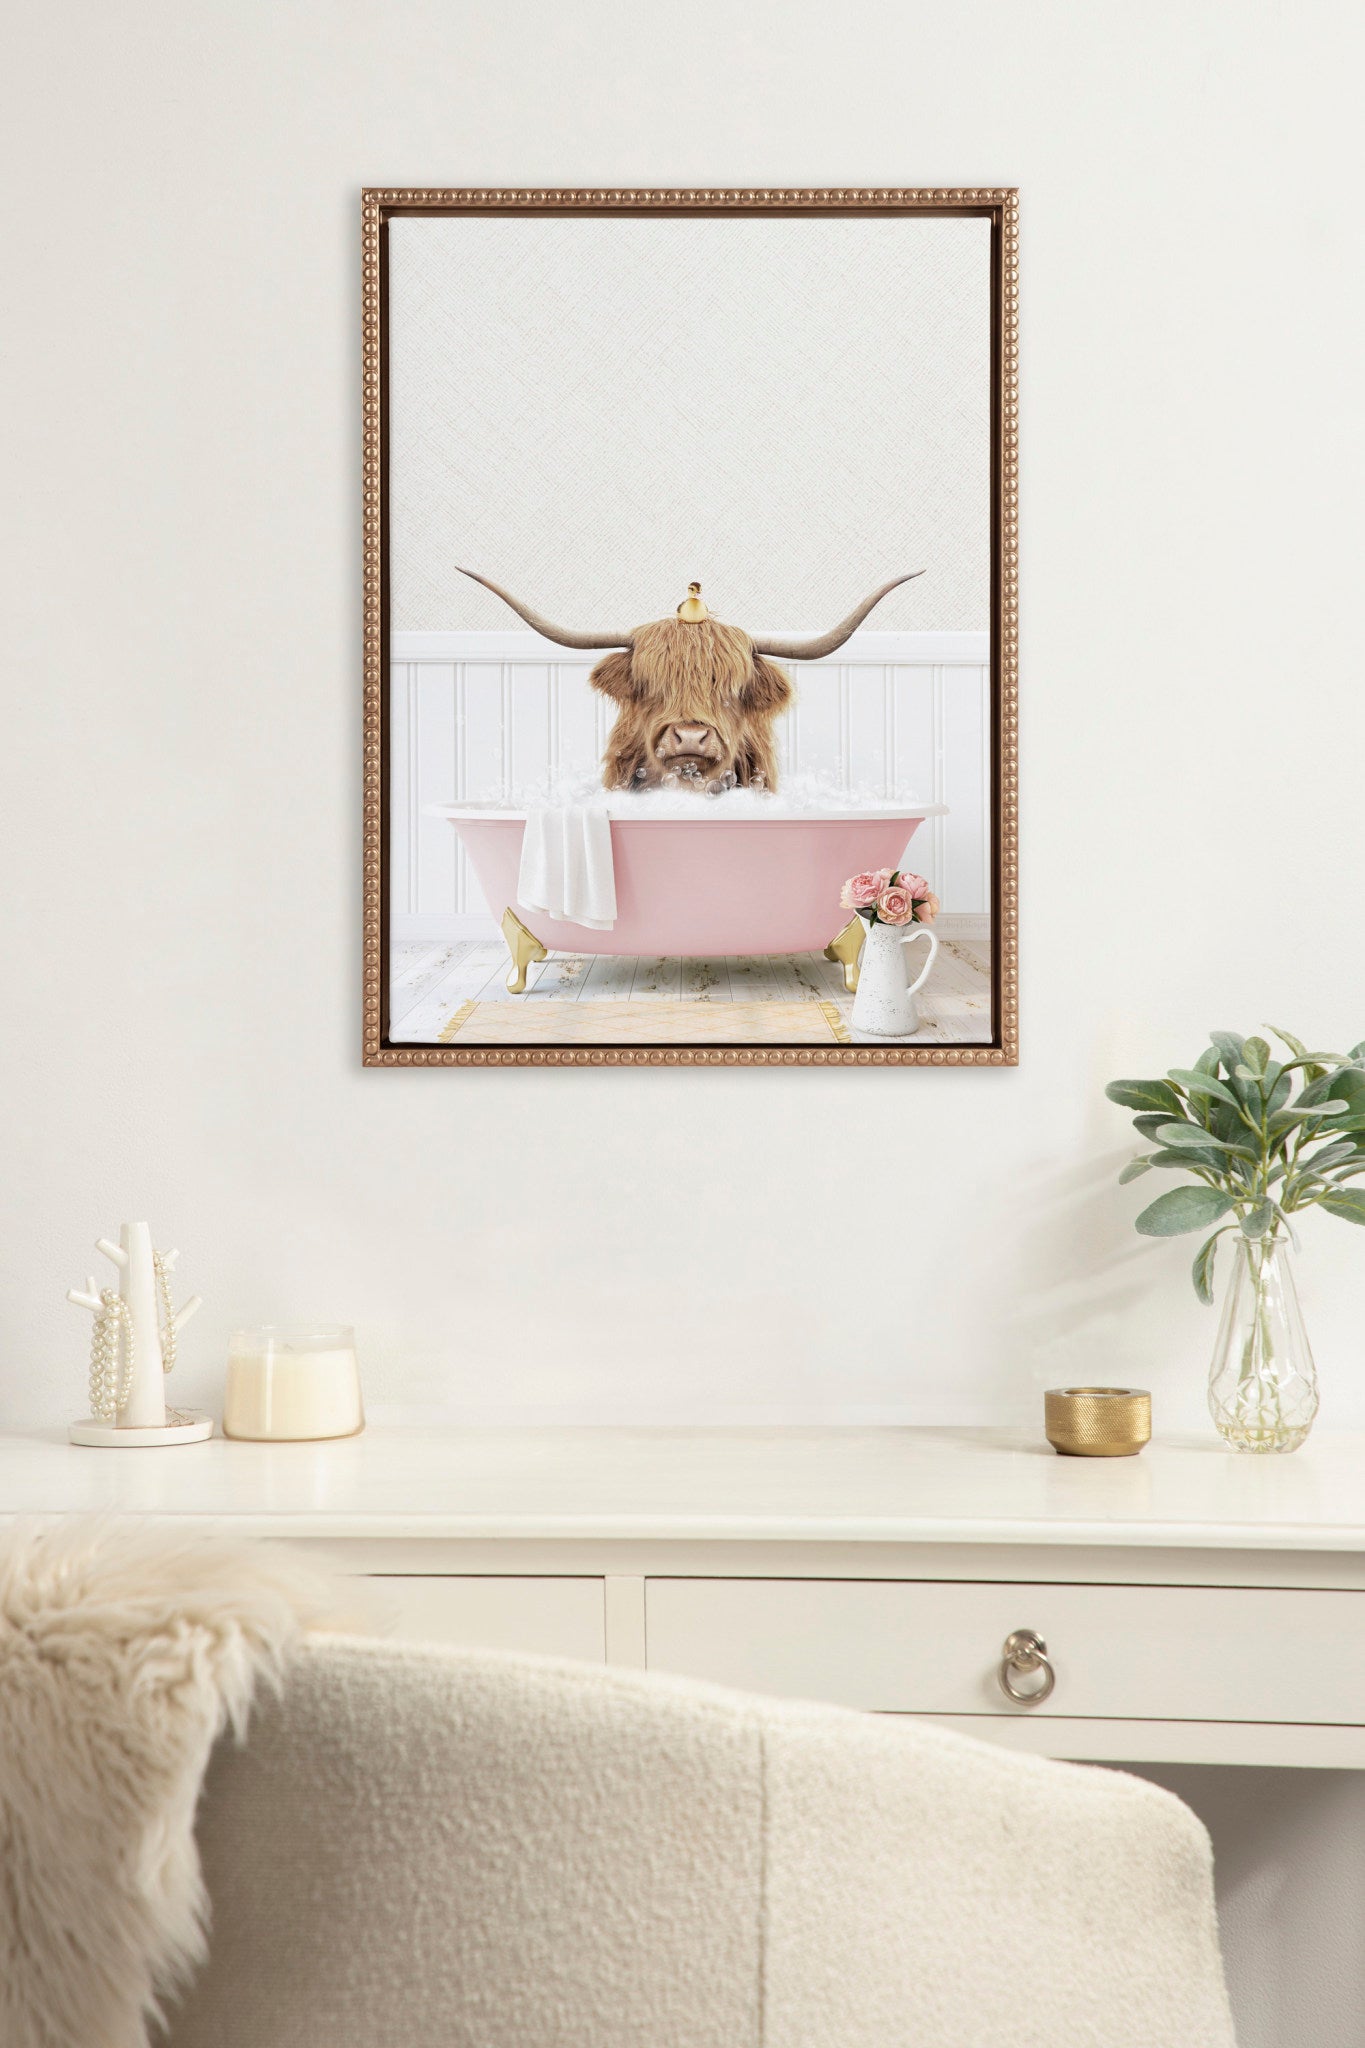 Sylvie Beaded Highland Cow with Duckling Cottage Rose Bath Framed Canvas by Amy Peterson